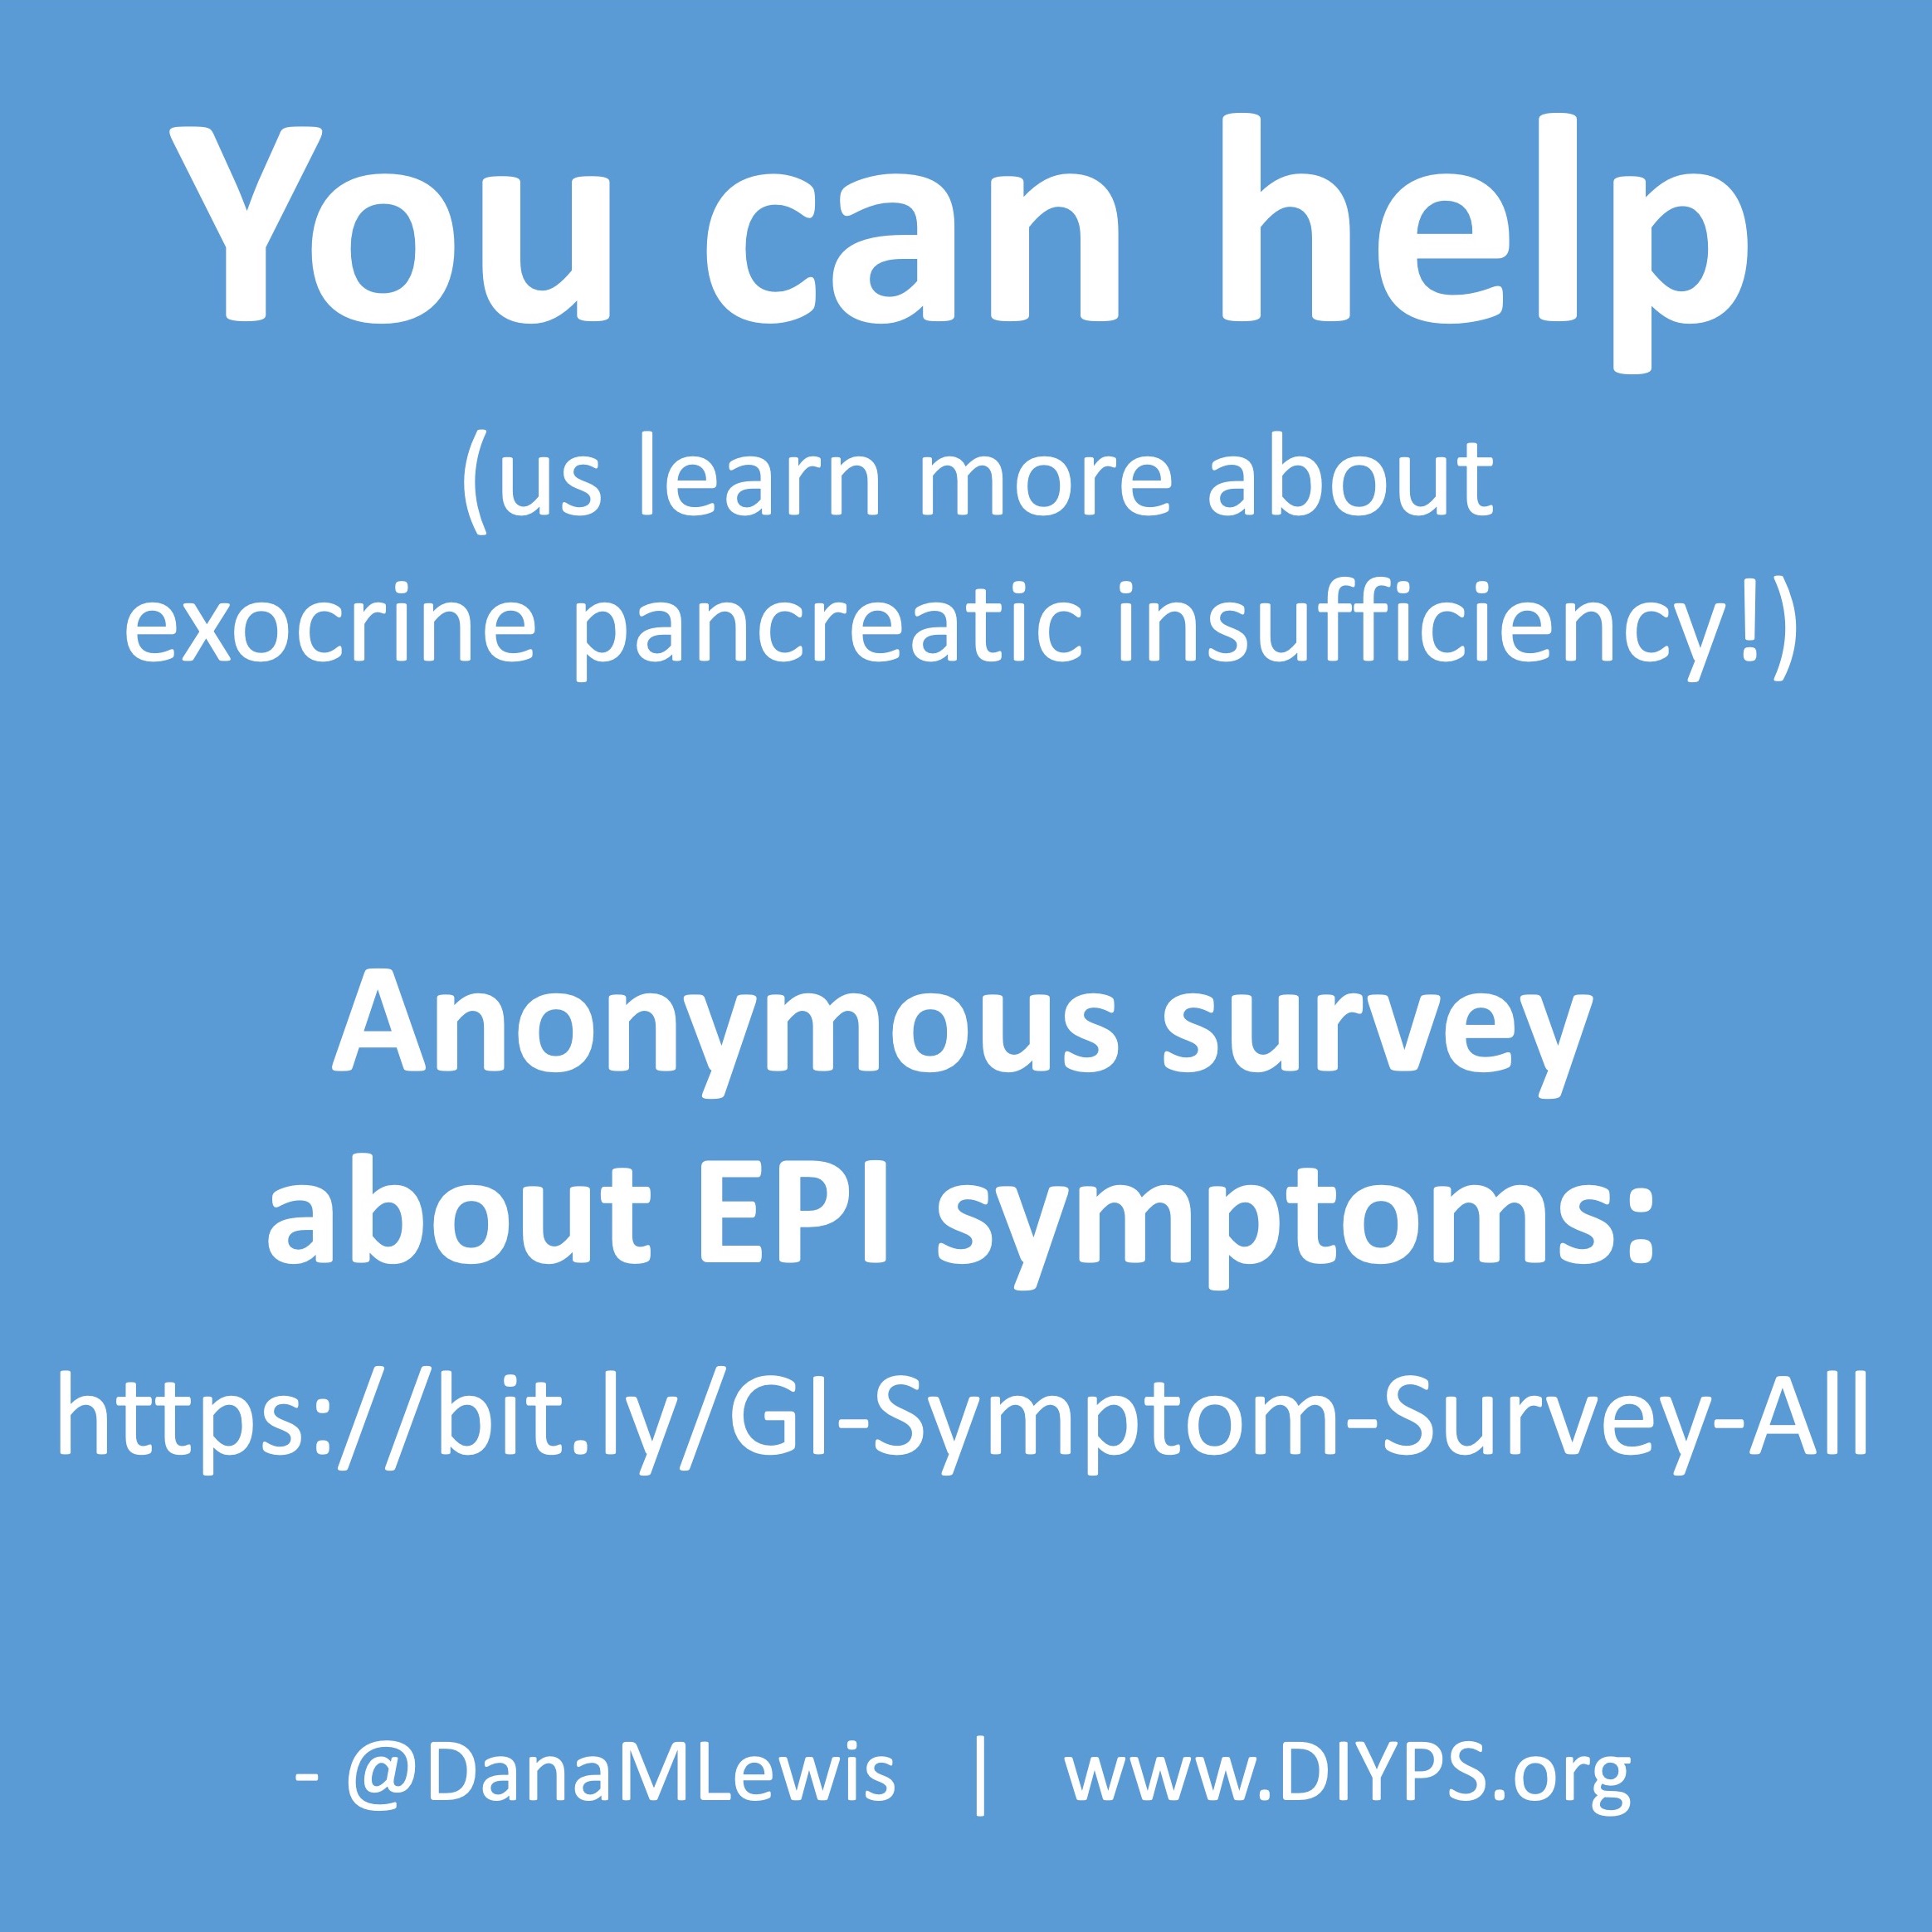 You can help us learn more about exocrine pancreatic insufficiency. Take the anonymous survey about EPI symptoms: https://bit.ly/GI-Symptom-Survey-All